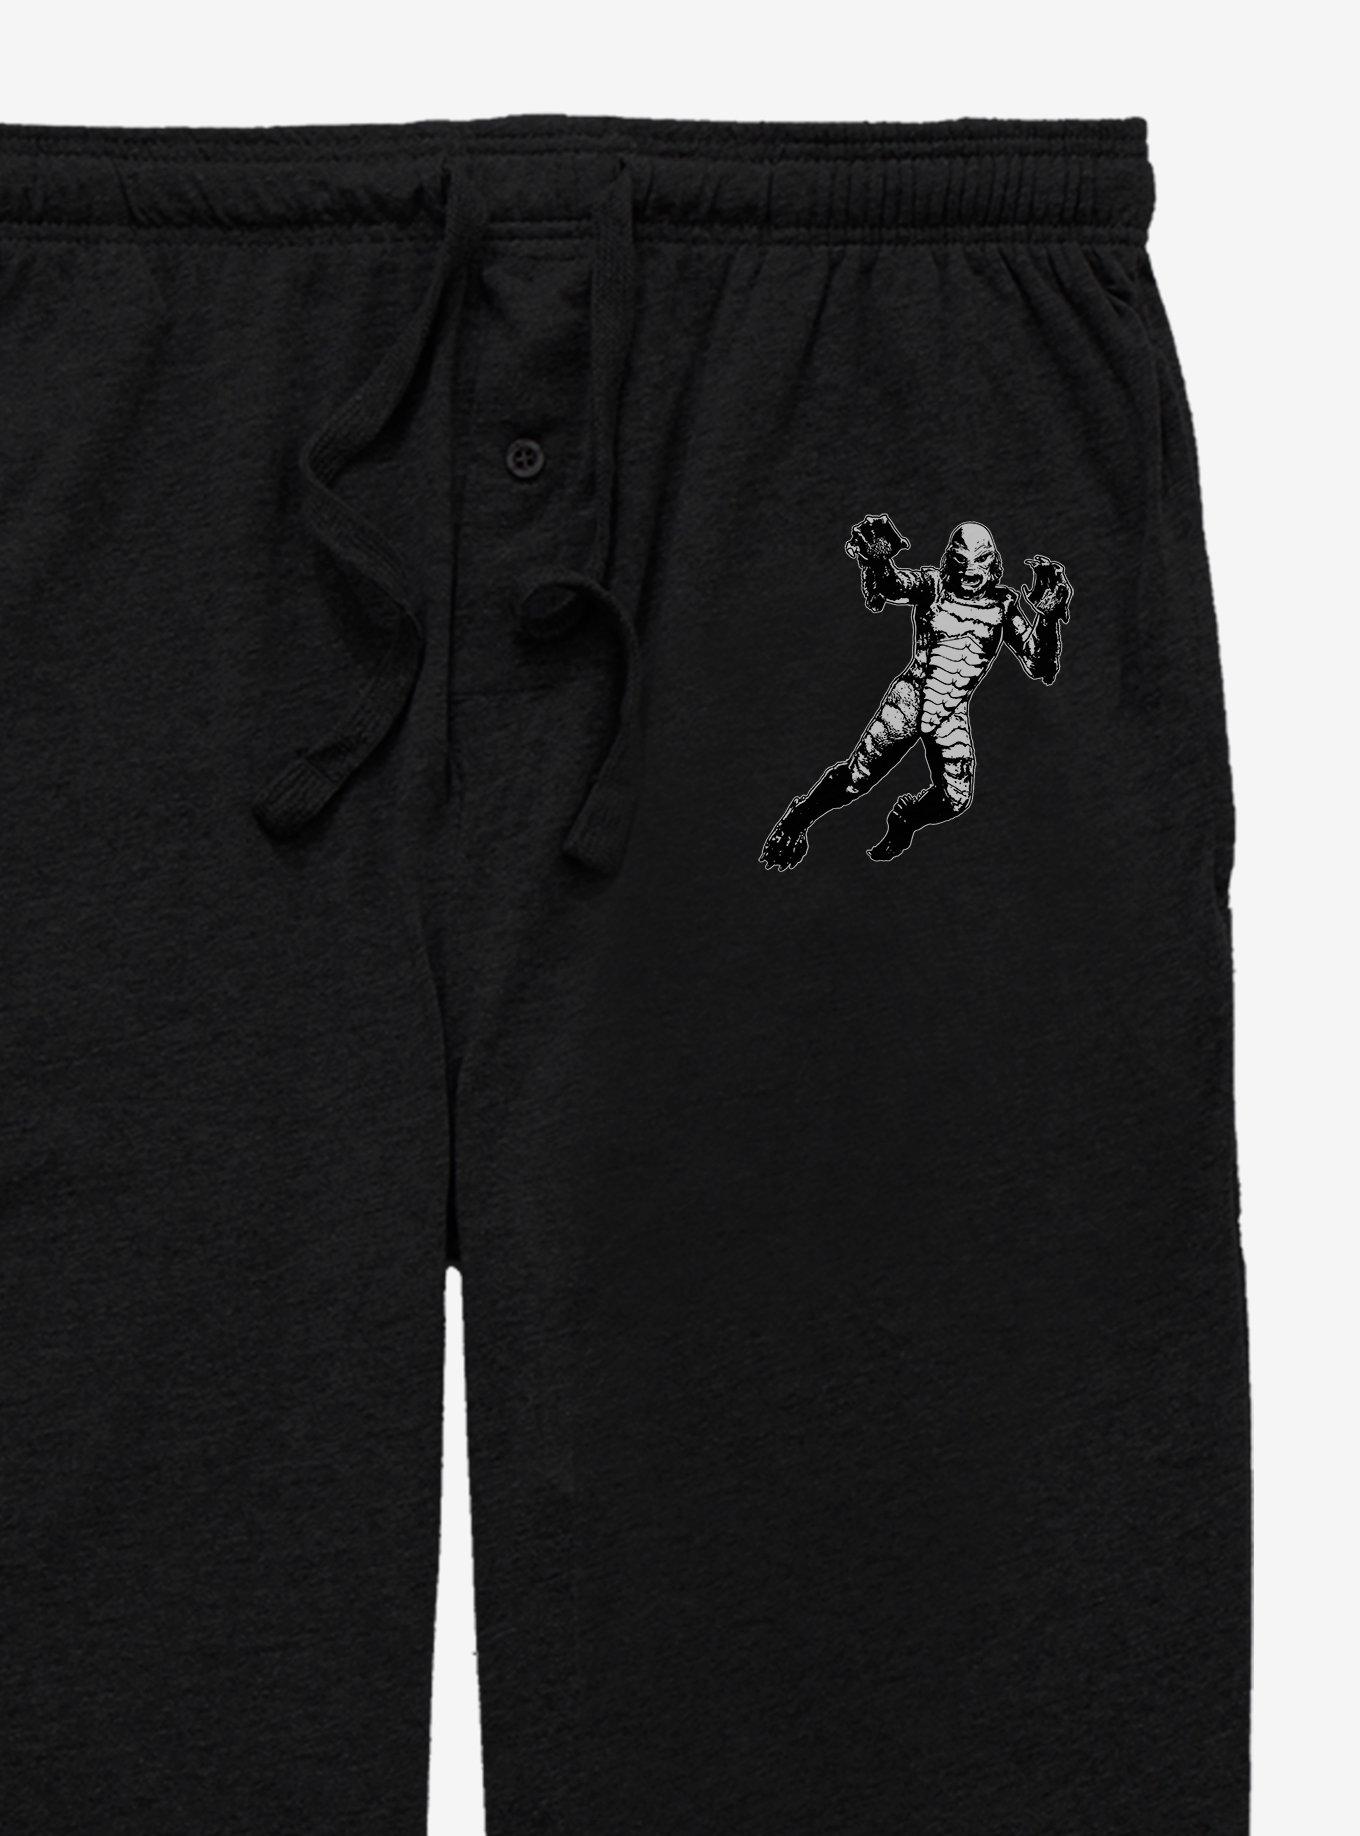 Creature From The Black Lagoon Horror Stance Pajama Pants